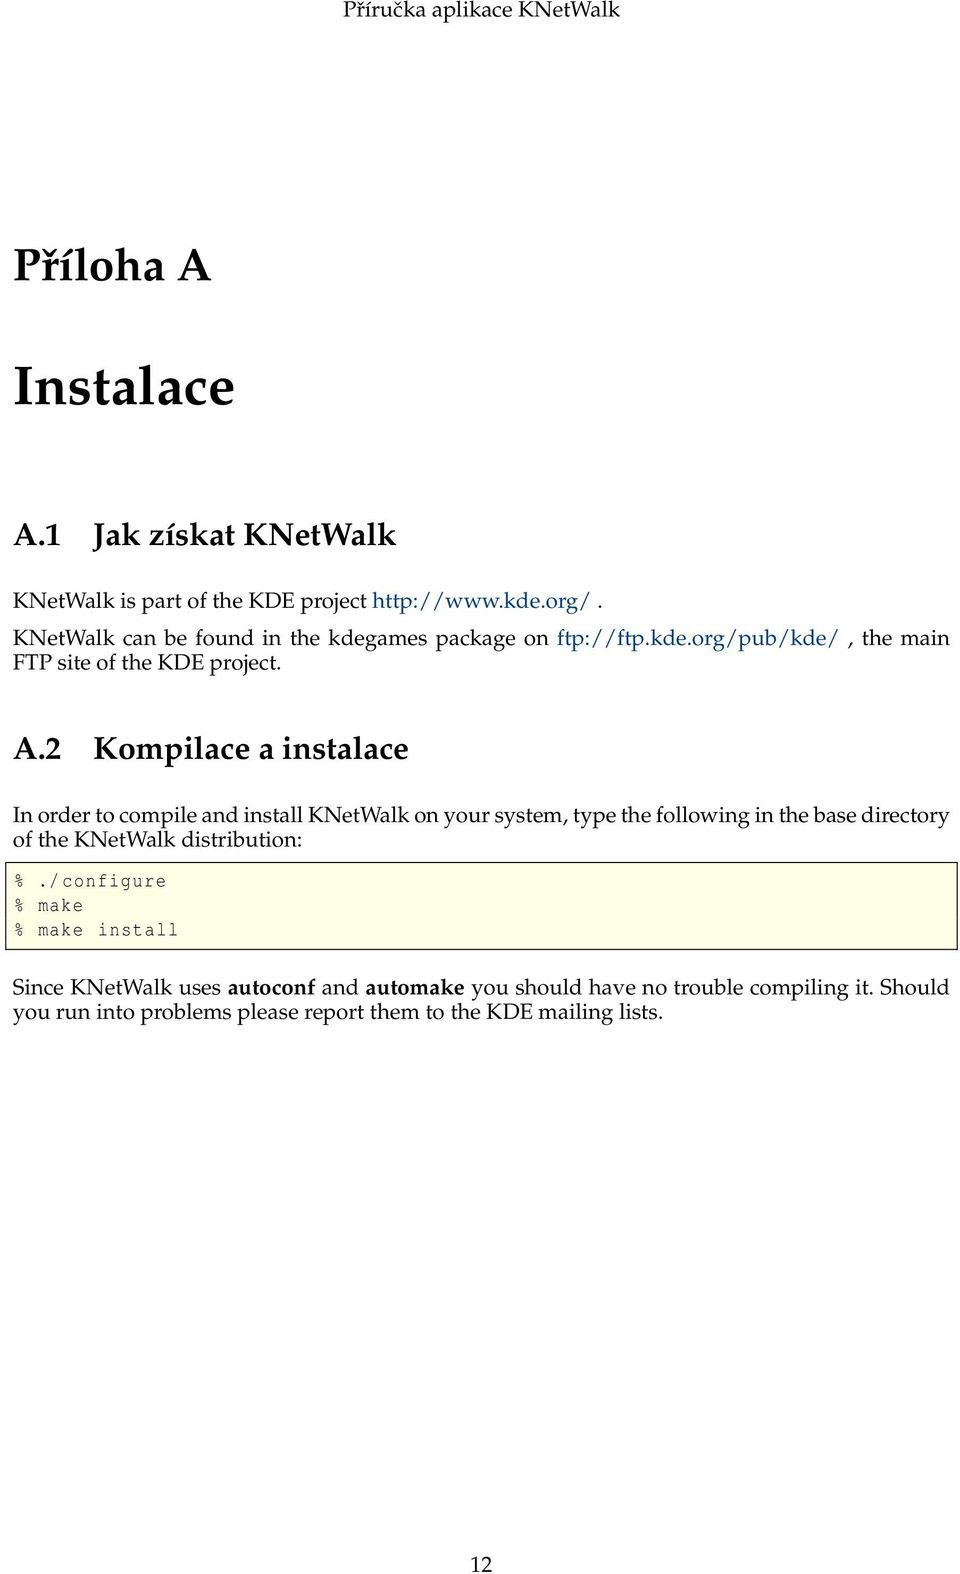 2 Kompilace a instalace In order to compile and install KNetWalk on your system, type the following in the base directory of the KNetWalk